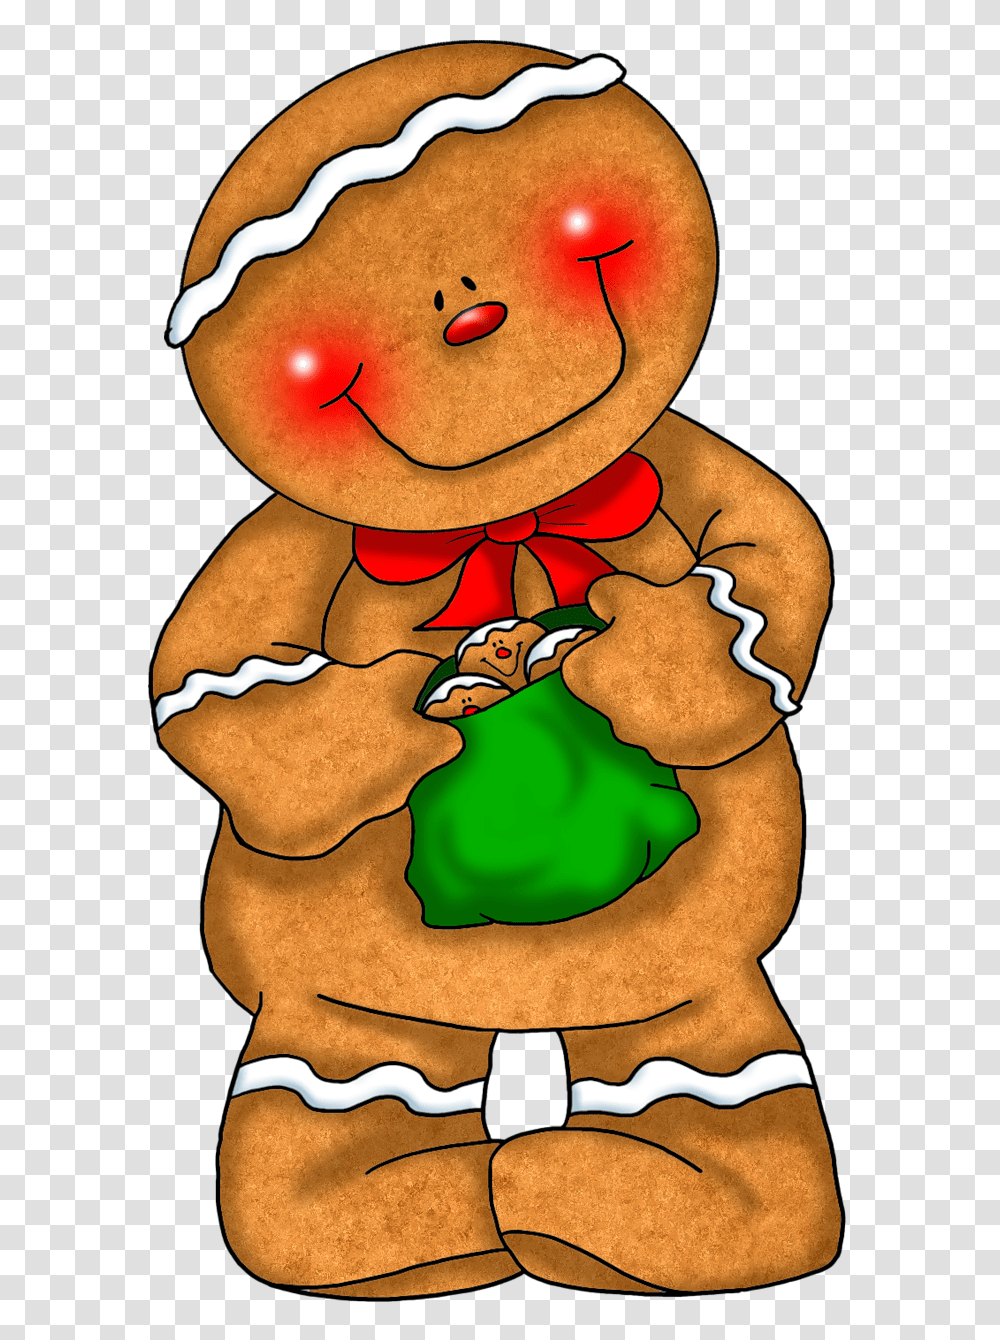 Free Gingerbread Man Clipart Pictures Clipartix, Cookie, Food, Biscuit, Sweets Transparent Png